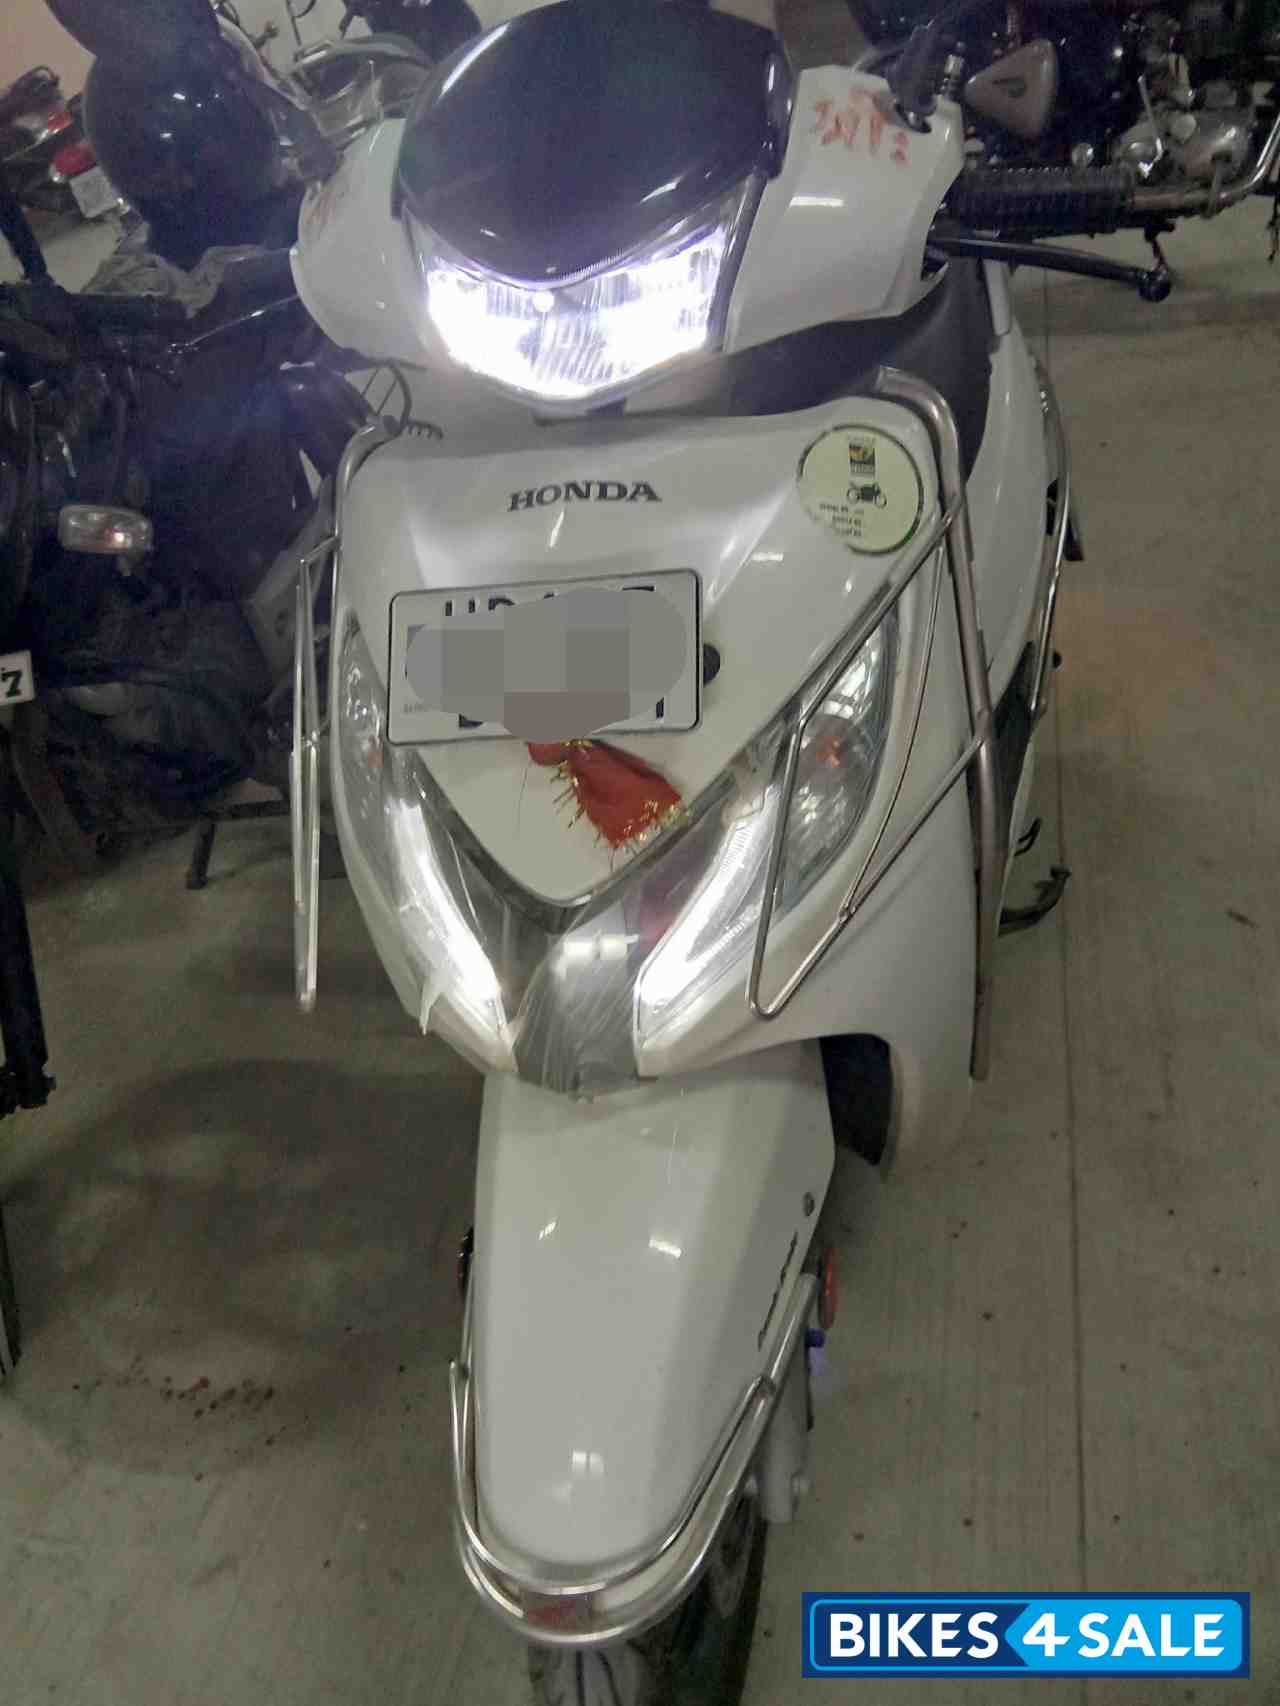 Used 2019 Model Honda Activa 125 For Sale In Ghaziabad Id 250515 Pearl White Colour Bikes4sale